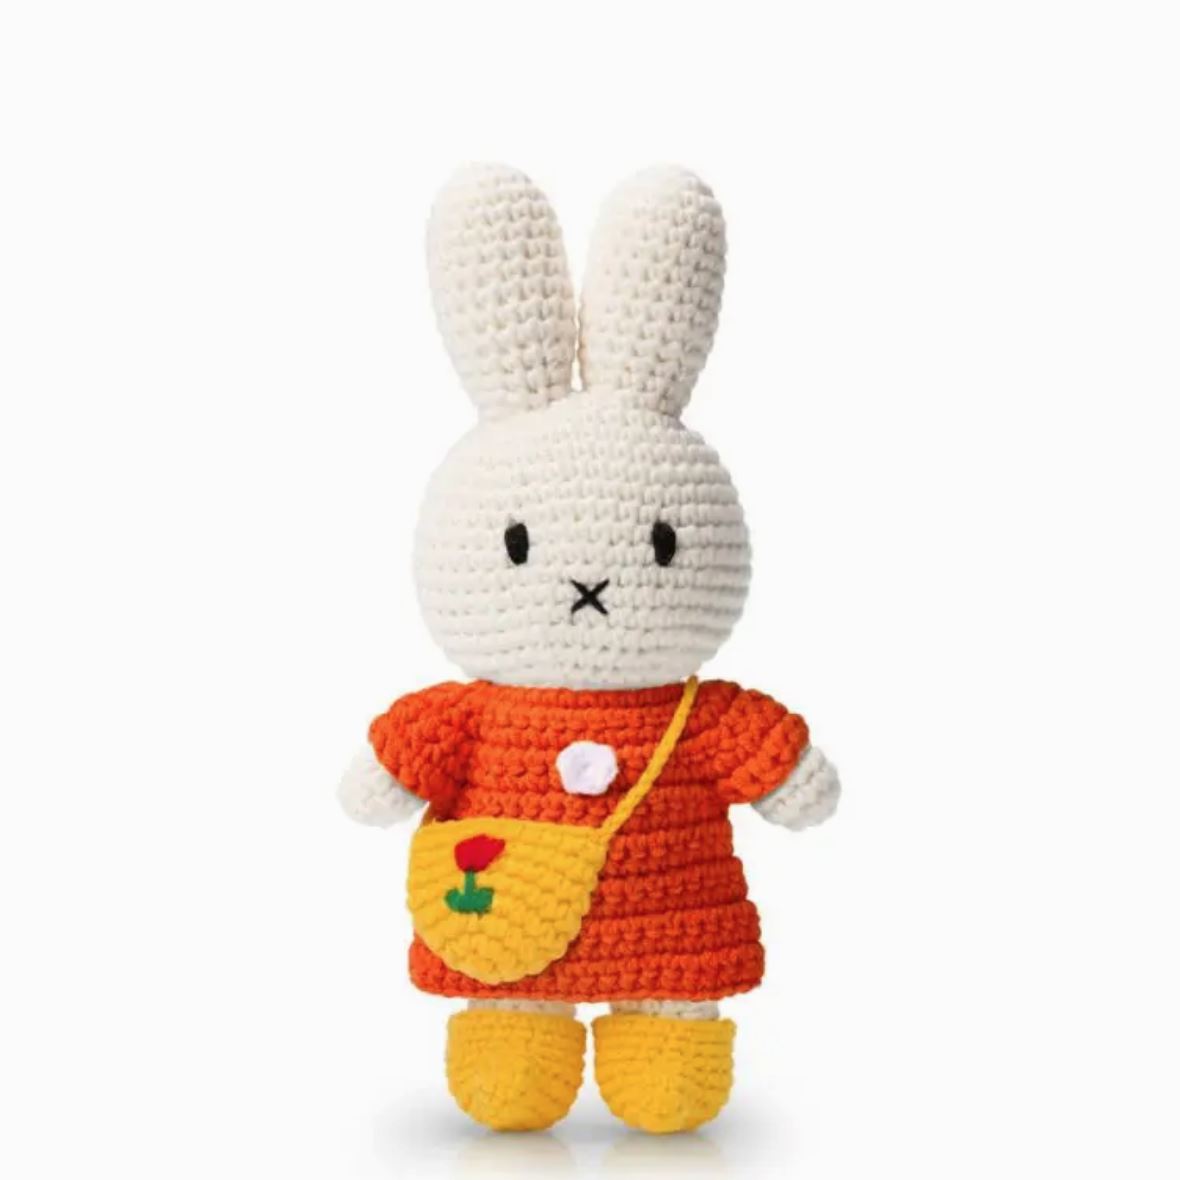 Miffy and Her Tulip Bag Handmade Crocheted Soft Toy - Third Drawer Down